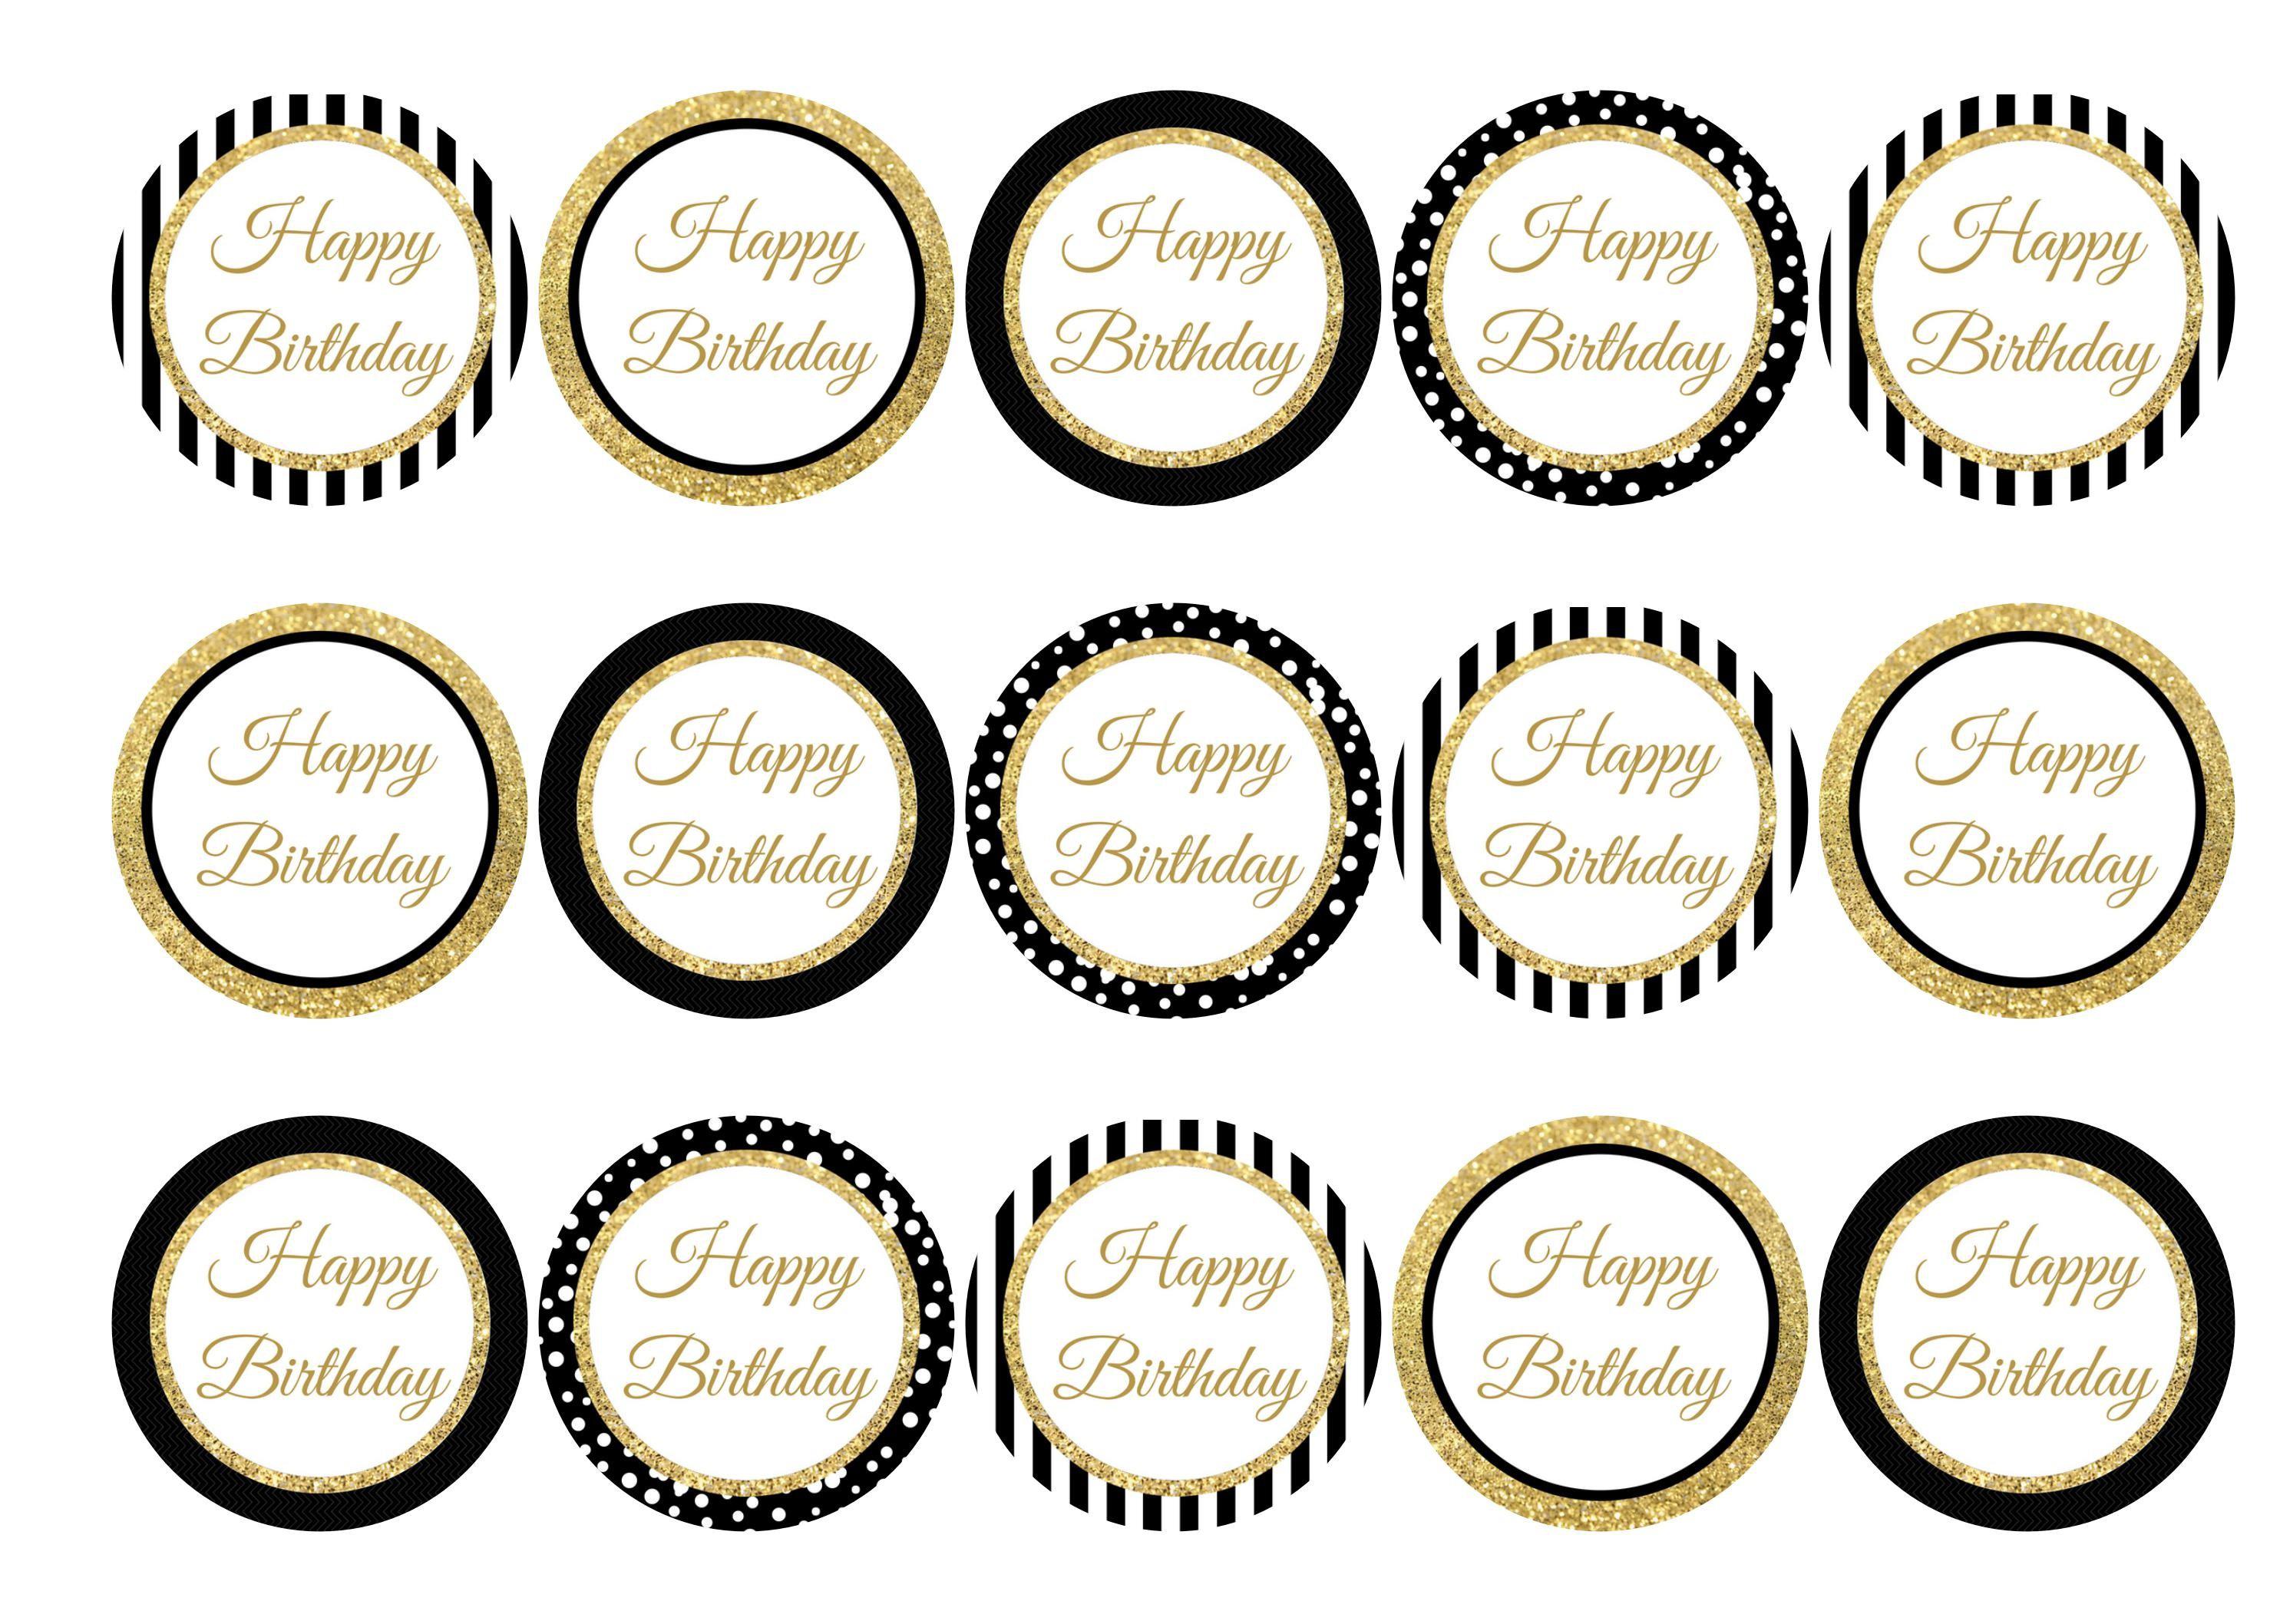 Black and gold printed cupcake toppers for a happy birthday